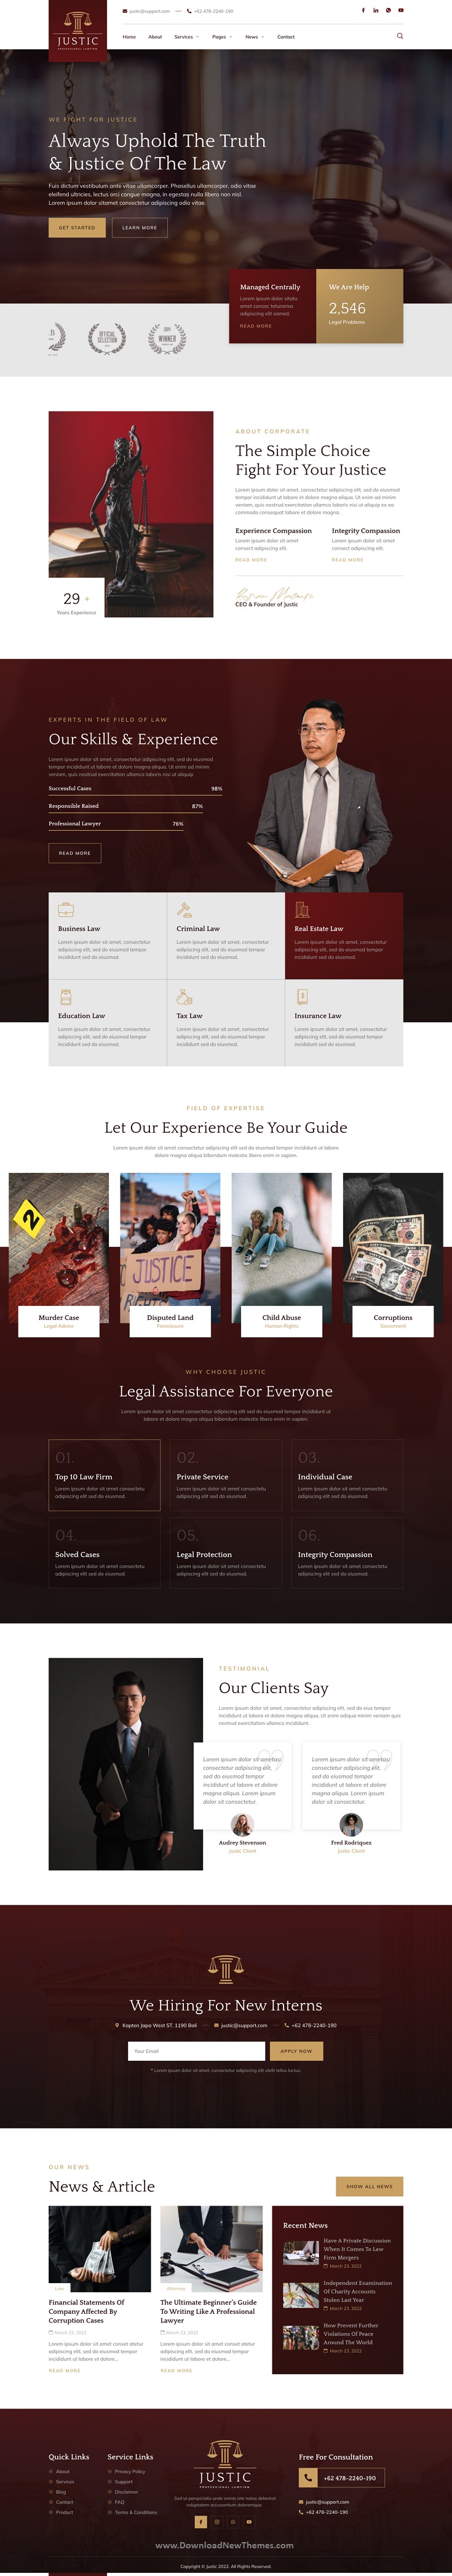 Justic – Law Firm & Legal Services Elementor Template Kit Review